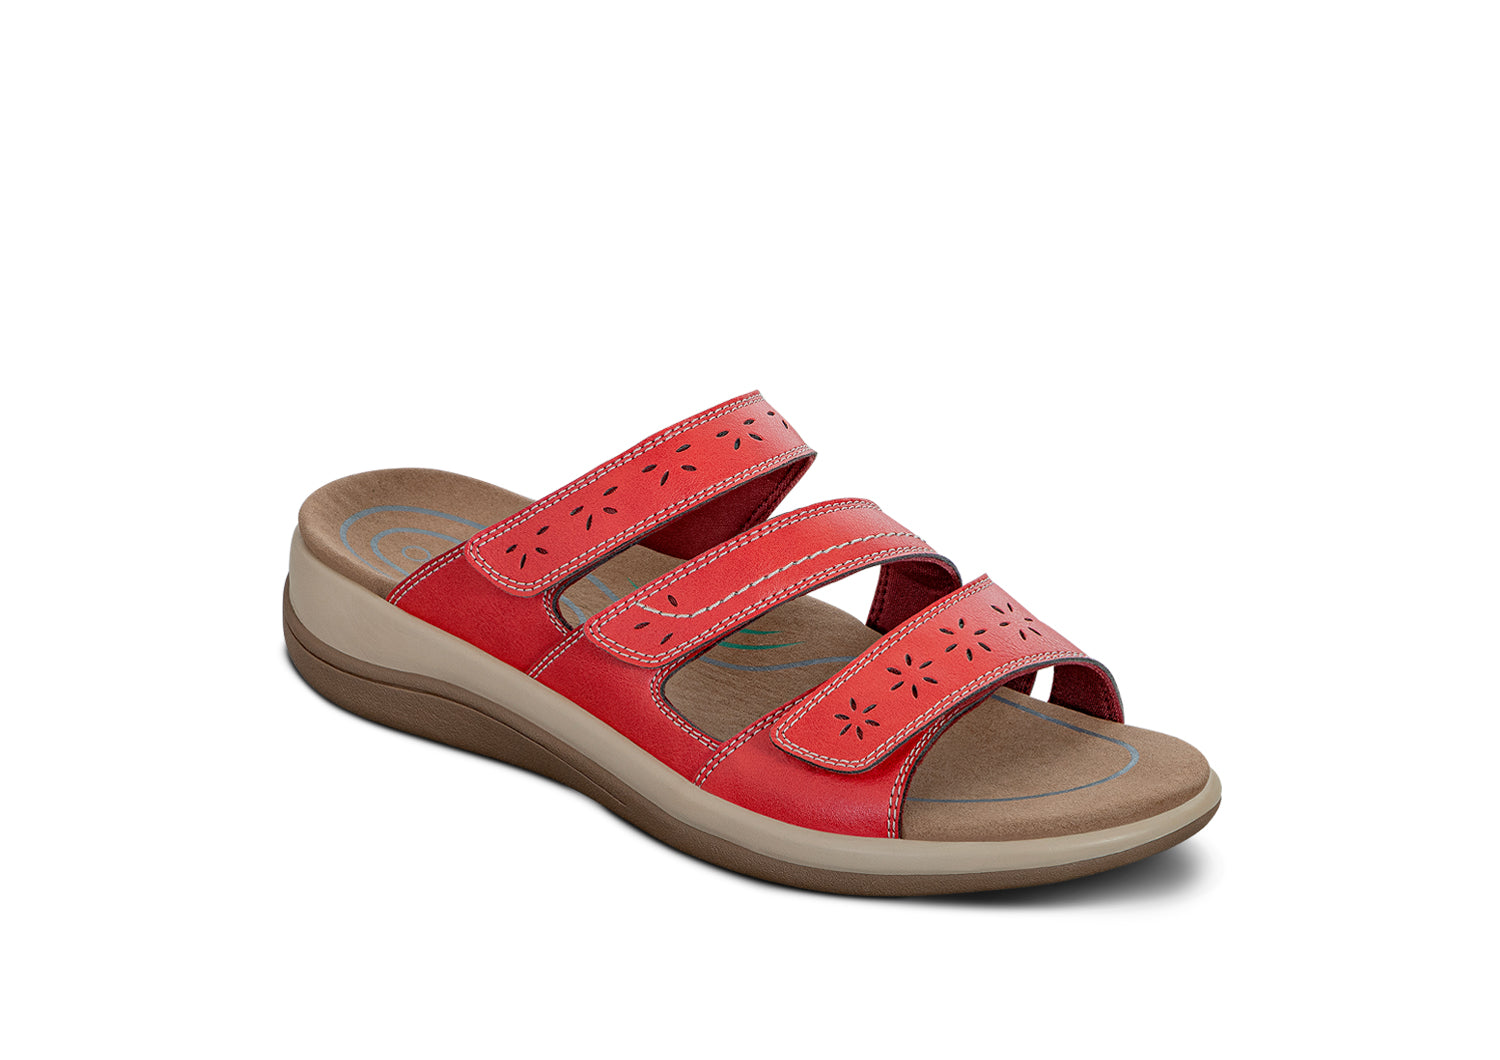 Women's Arch Support Slide Orthotic Sandals | Orthofeet Sahara Gray